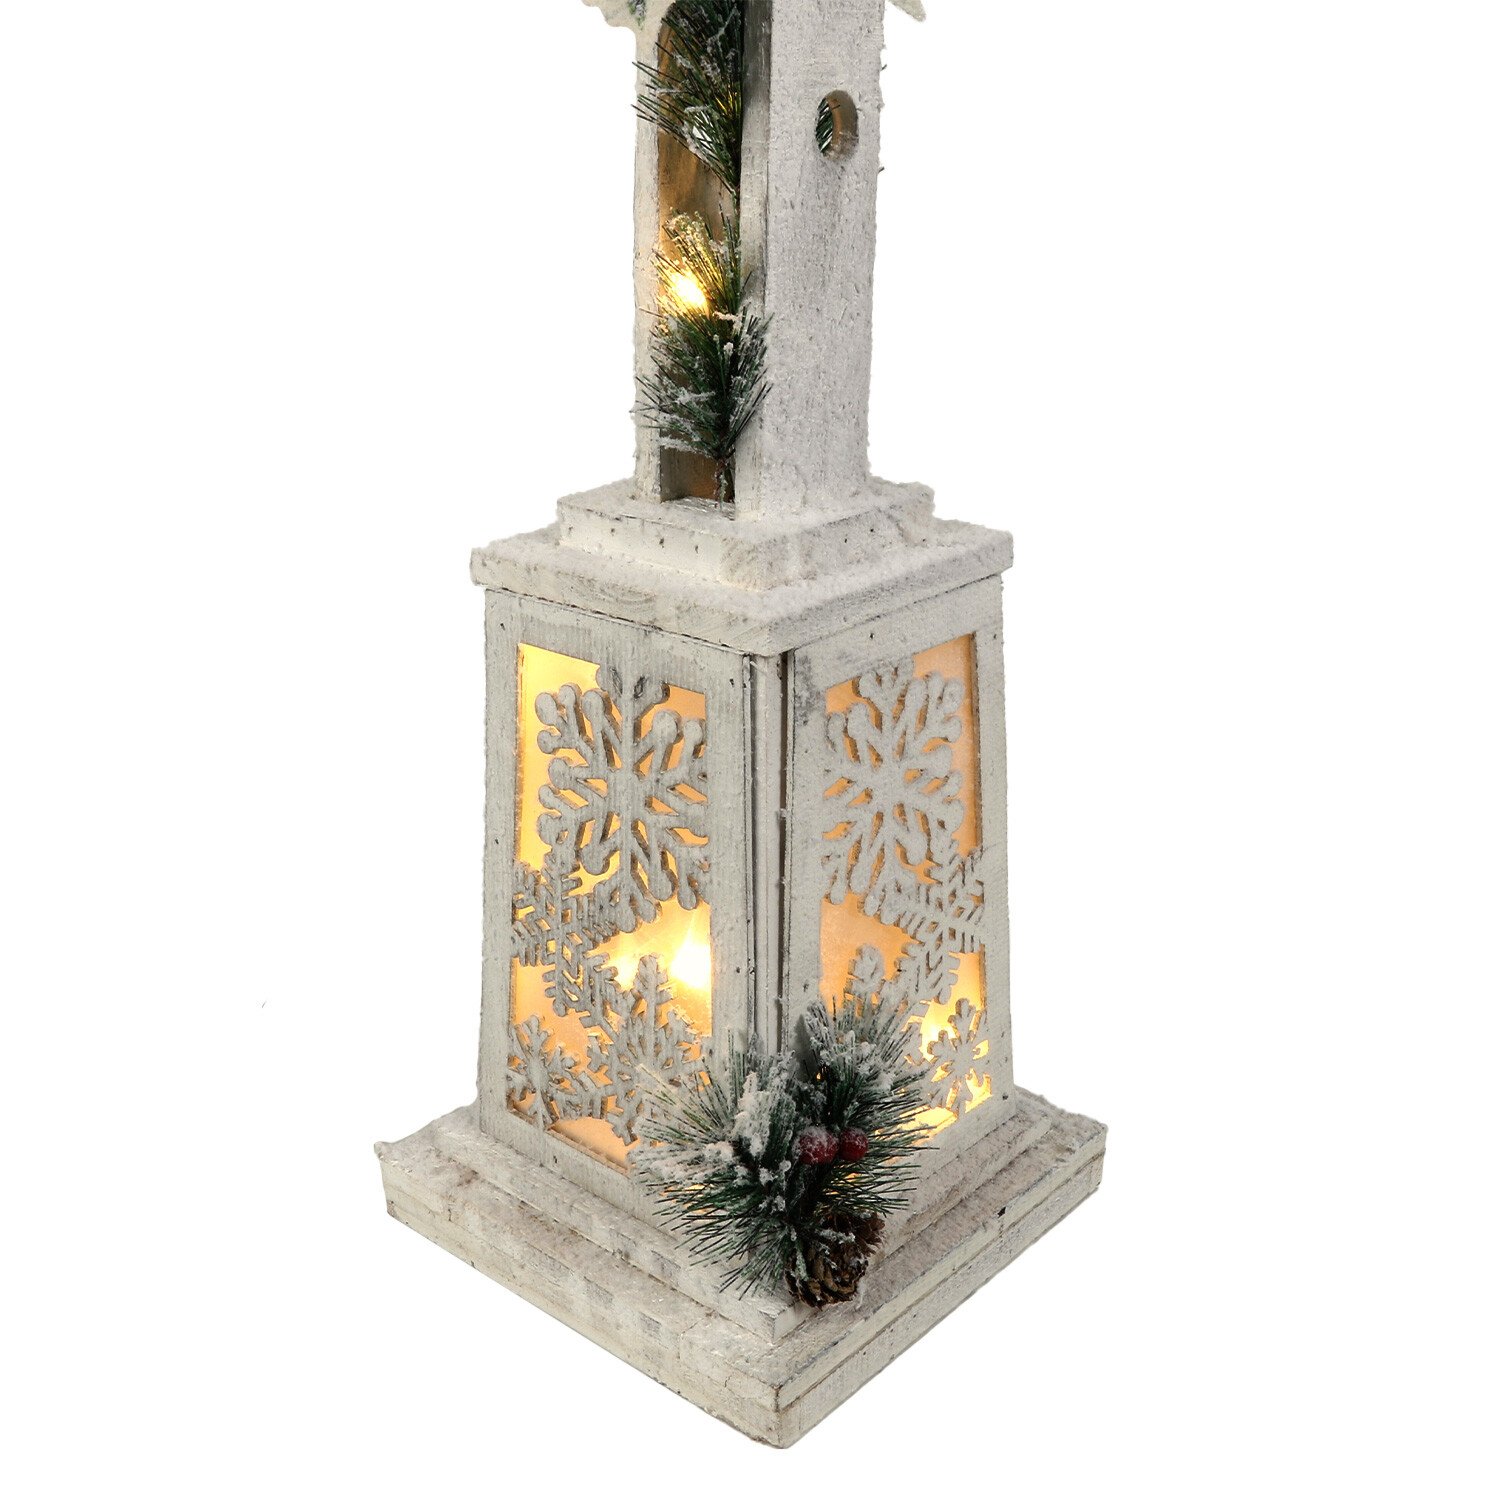 Frosted Fairytale White Snowy Wood Lantern Decoration Ornament Image 5